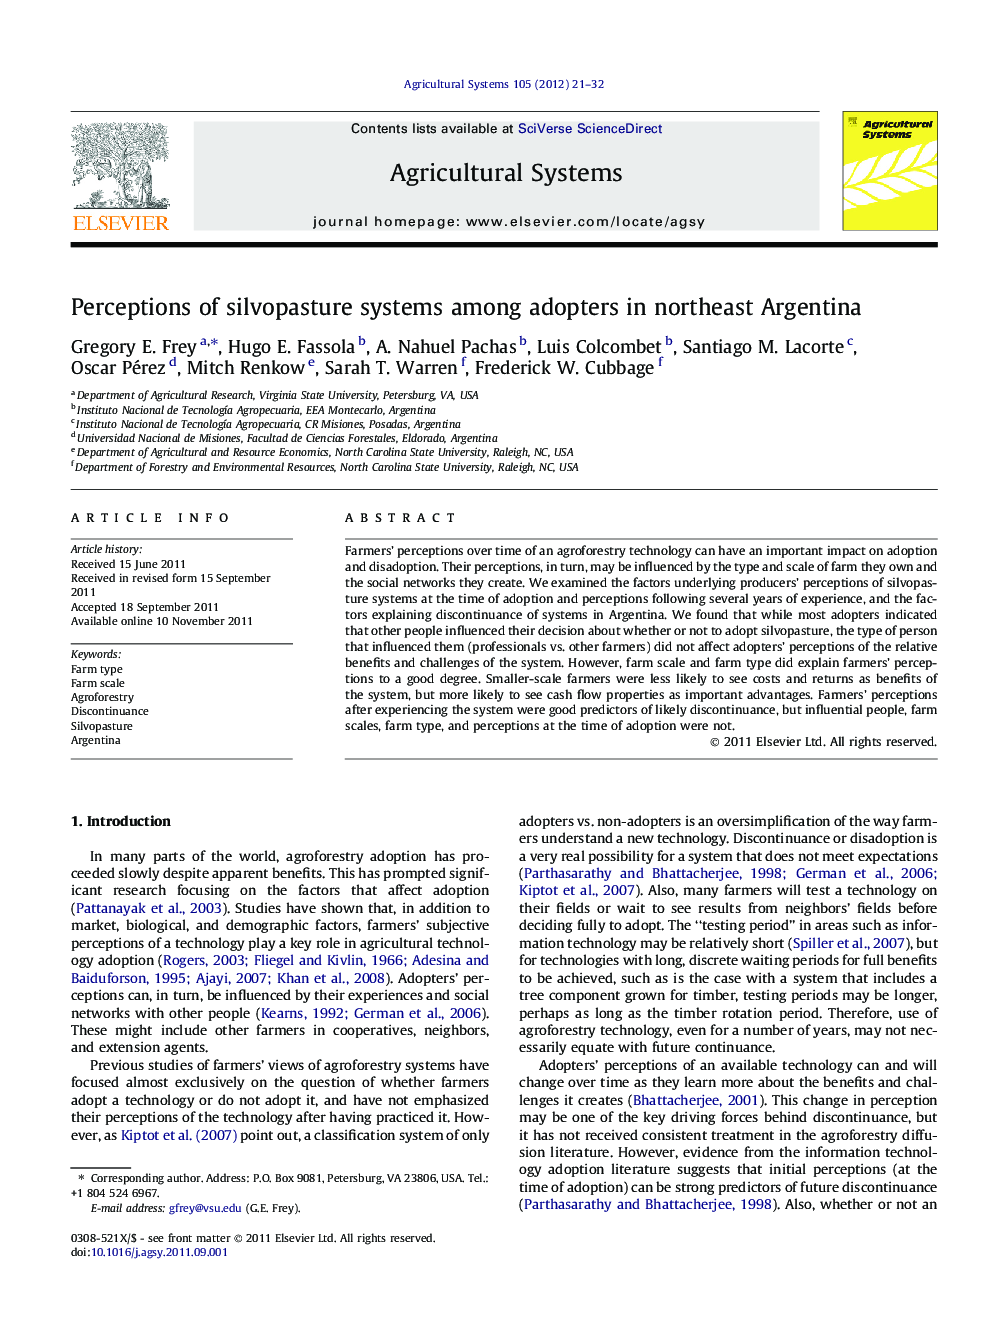 Perceptions of silvopasture systems among adopters in northeast Argentina